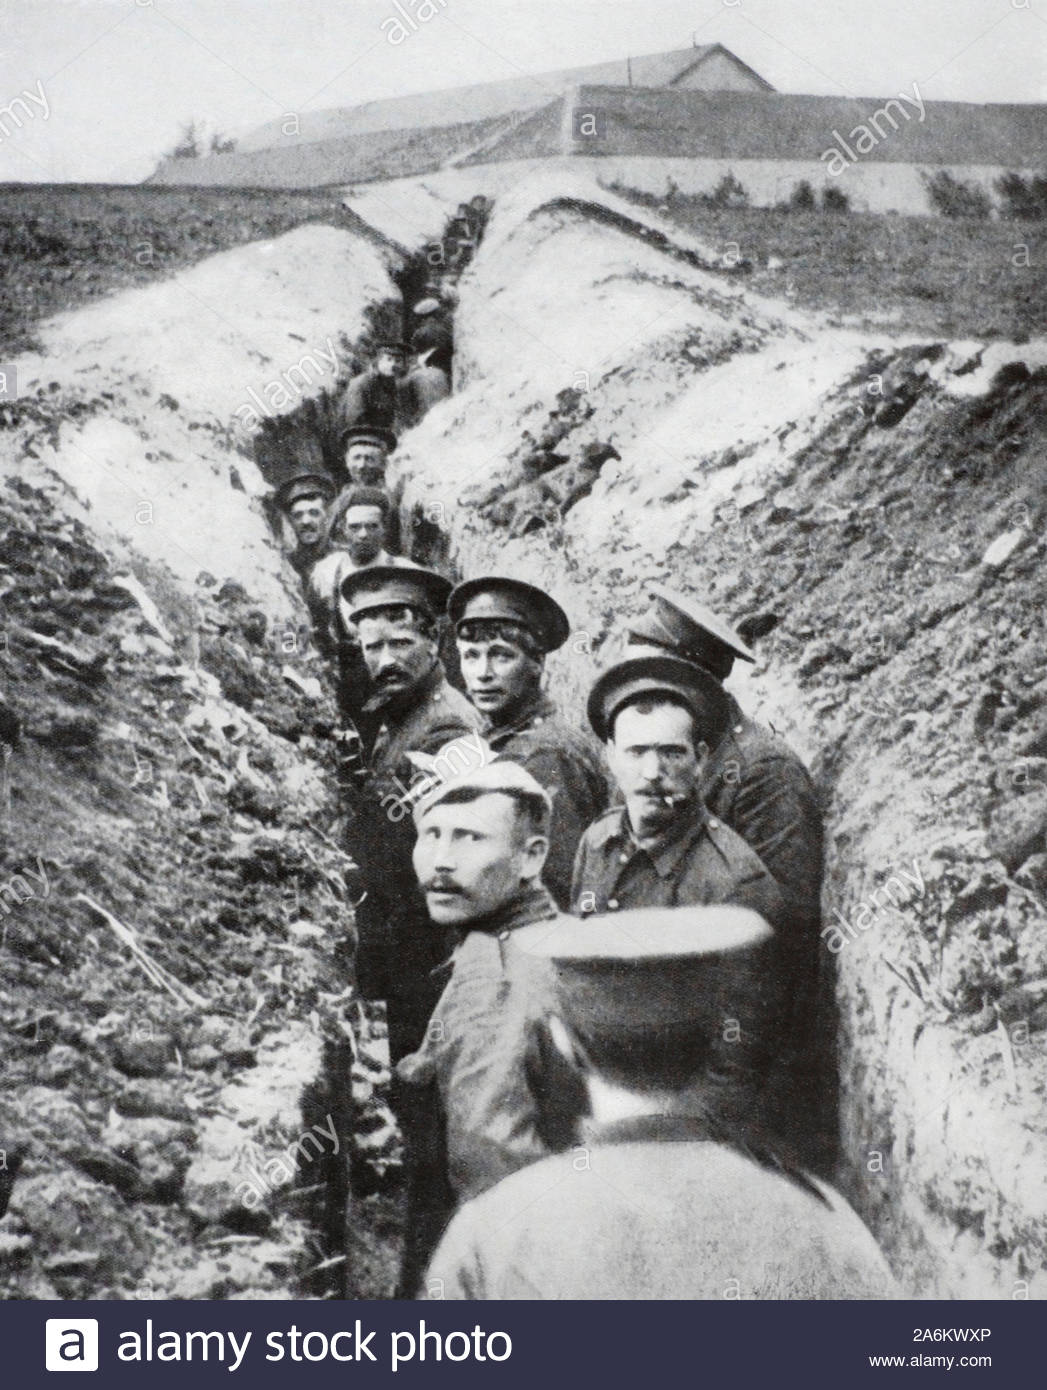 WW1 British soldiers in the trenches, vintage photograph from 1914 Stock Photo